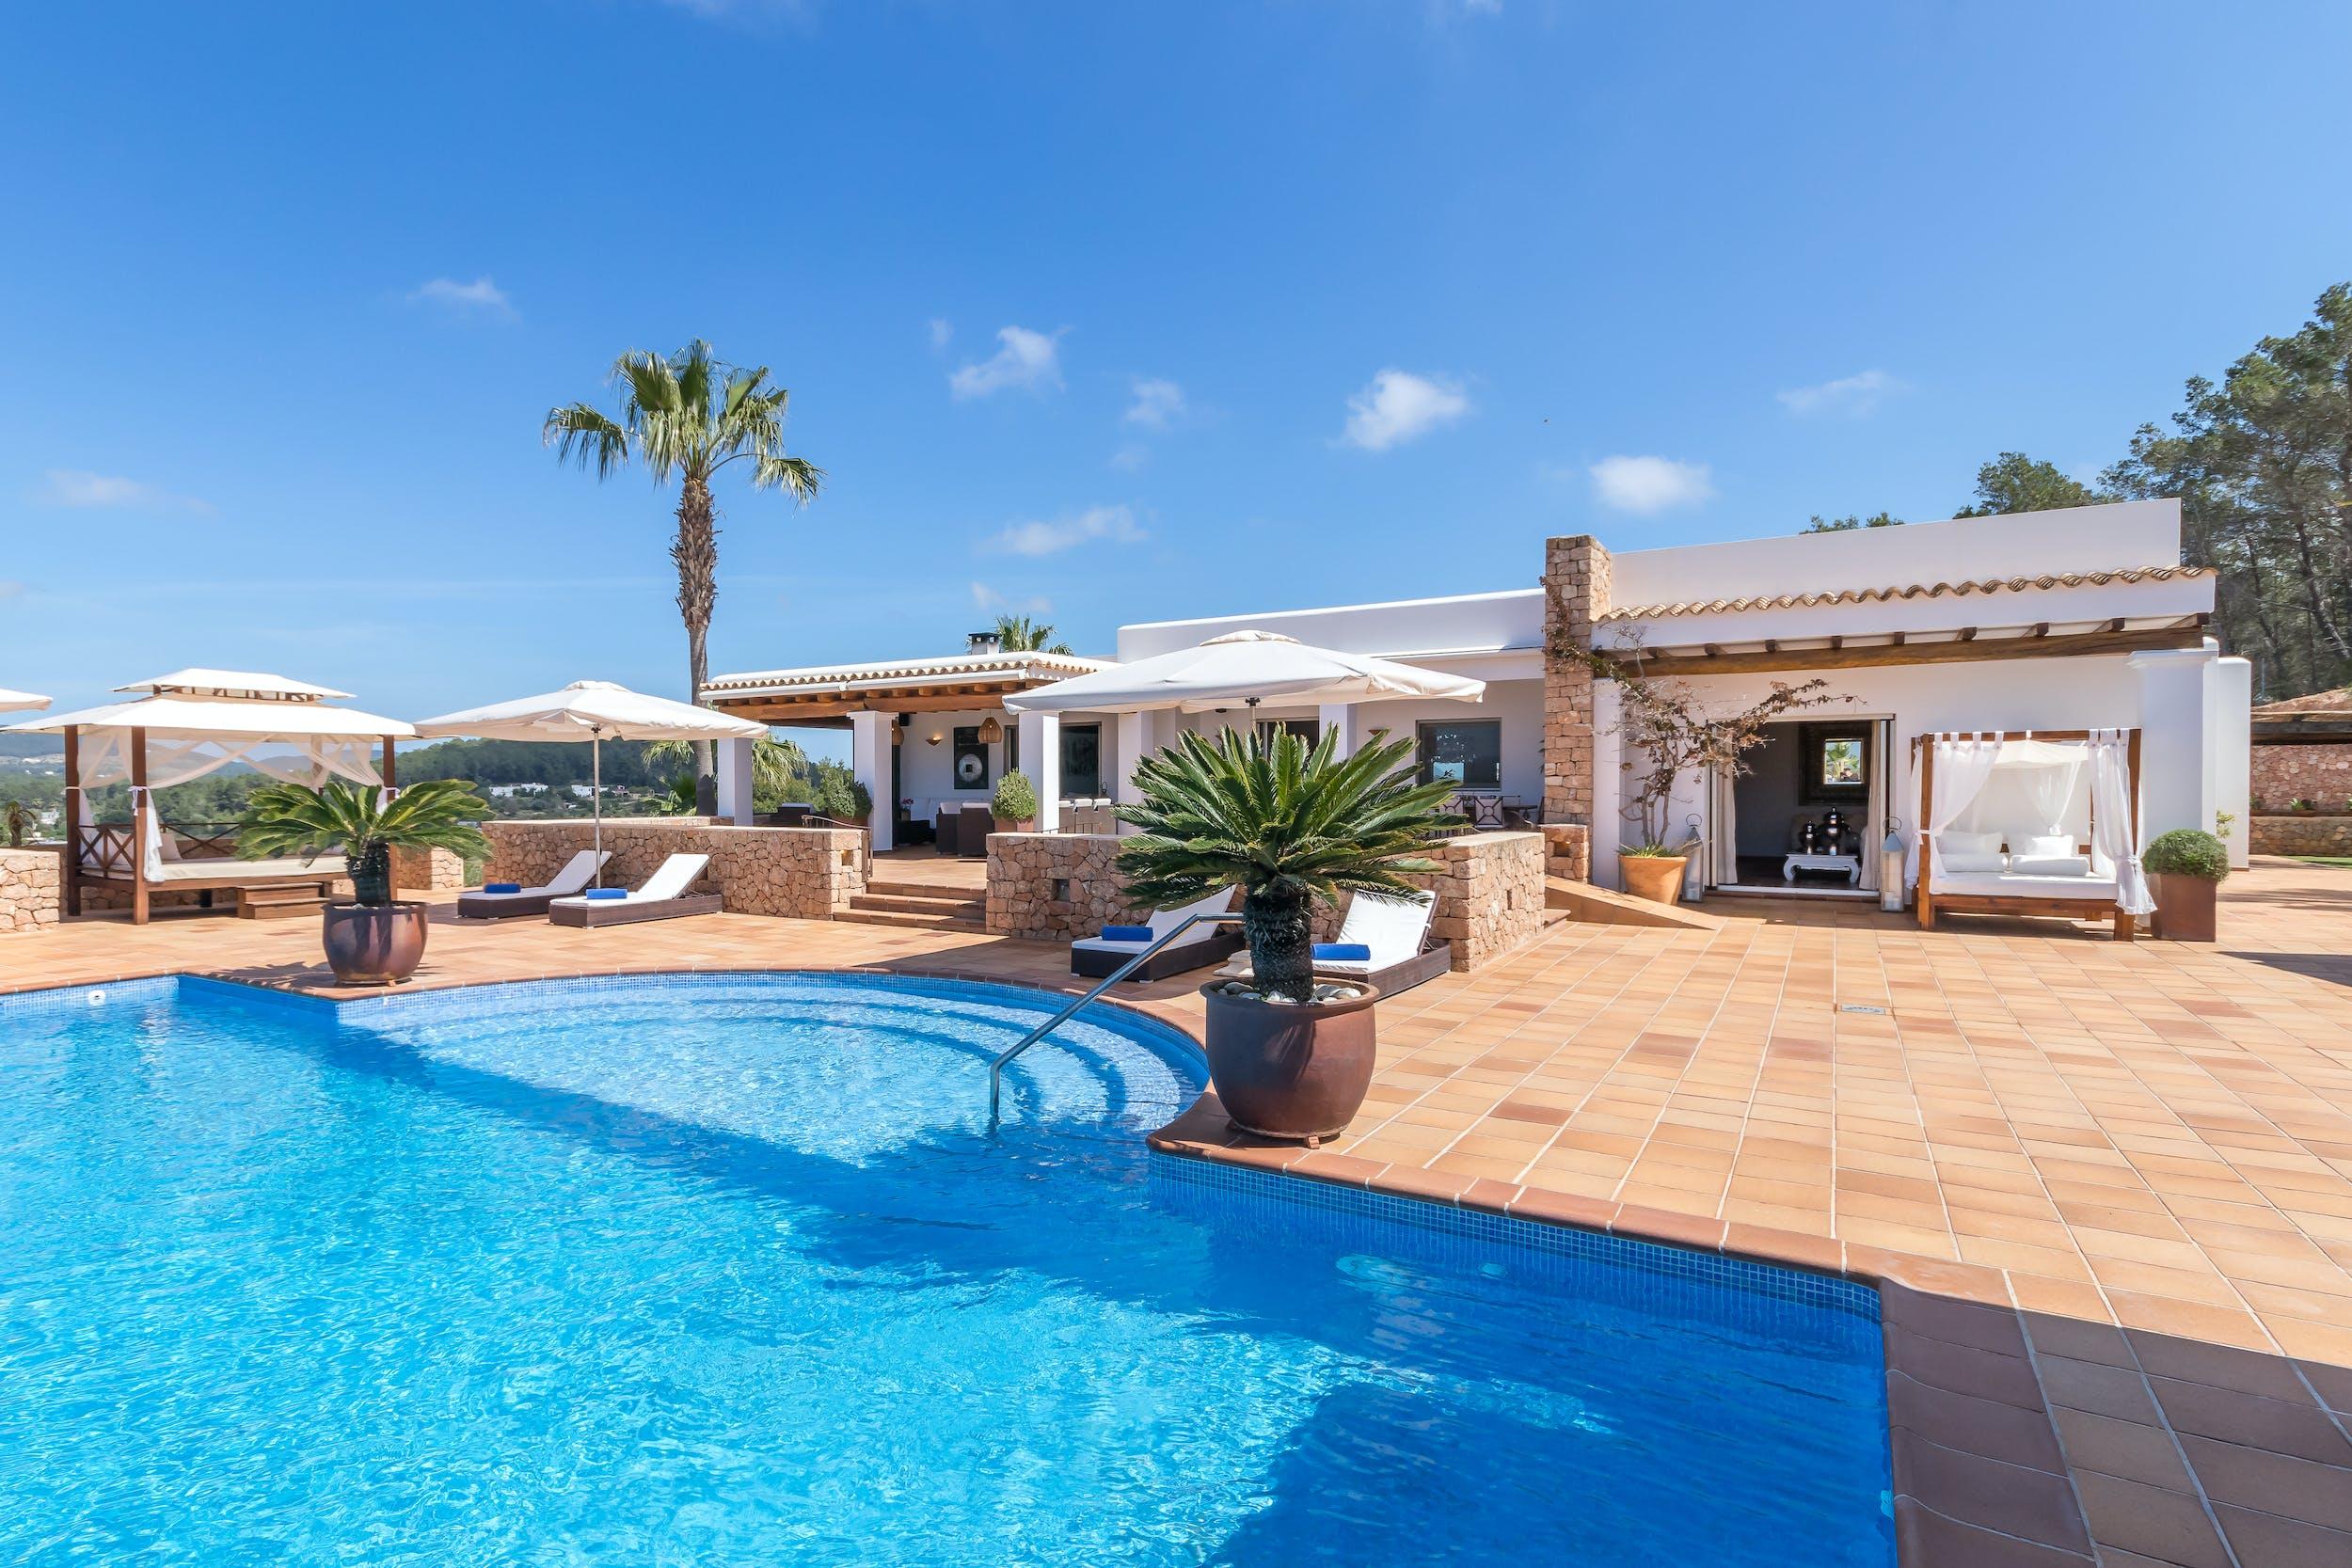 You are currently viewing Can Tierra – ‘Magnificent finca-style property with peaceful countryside views…’